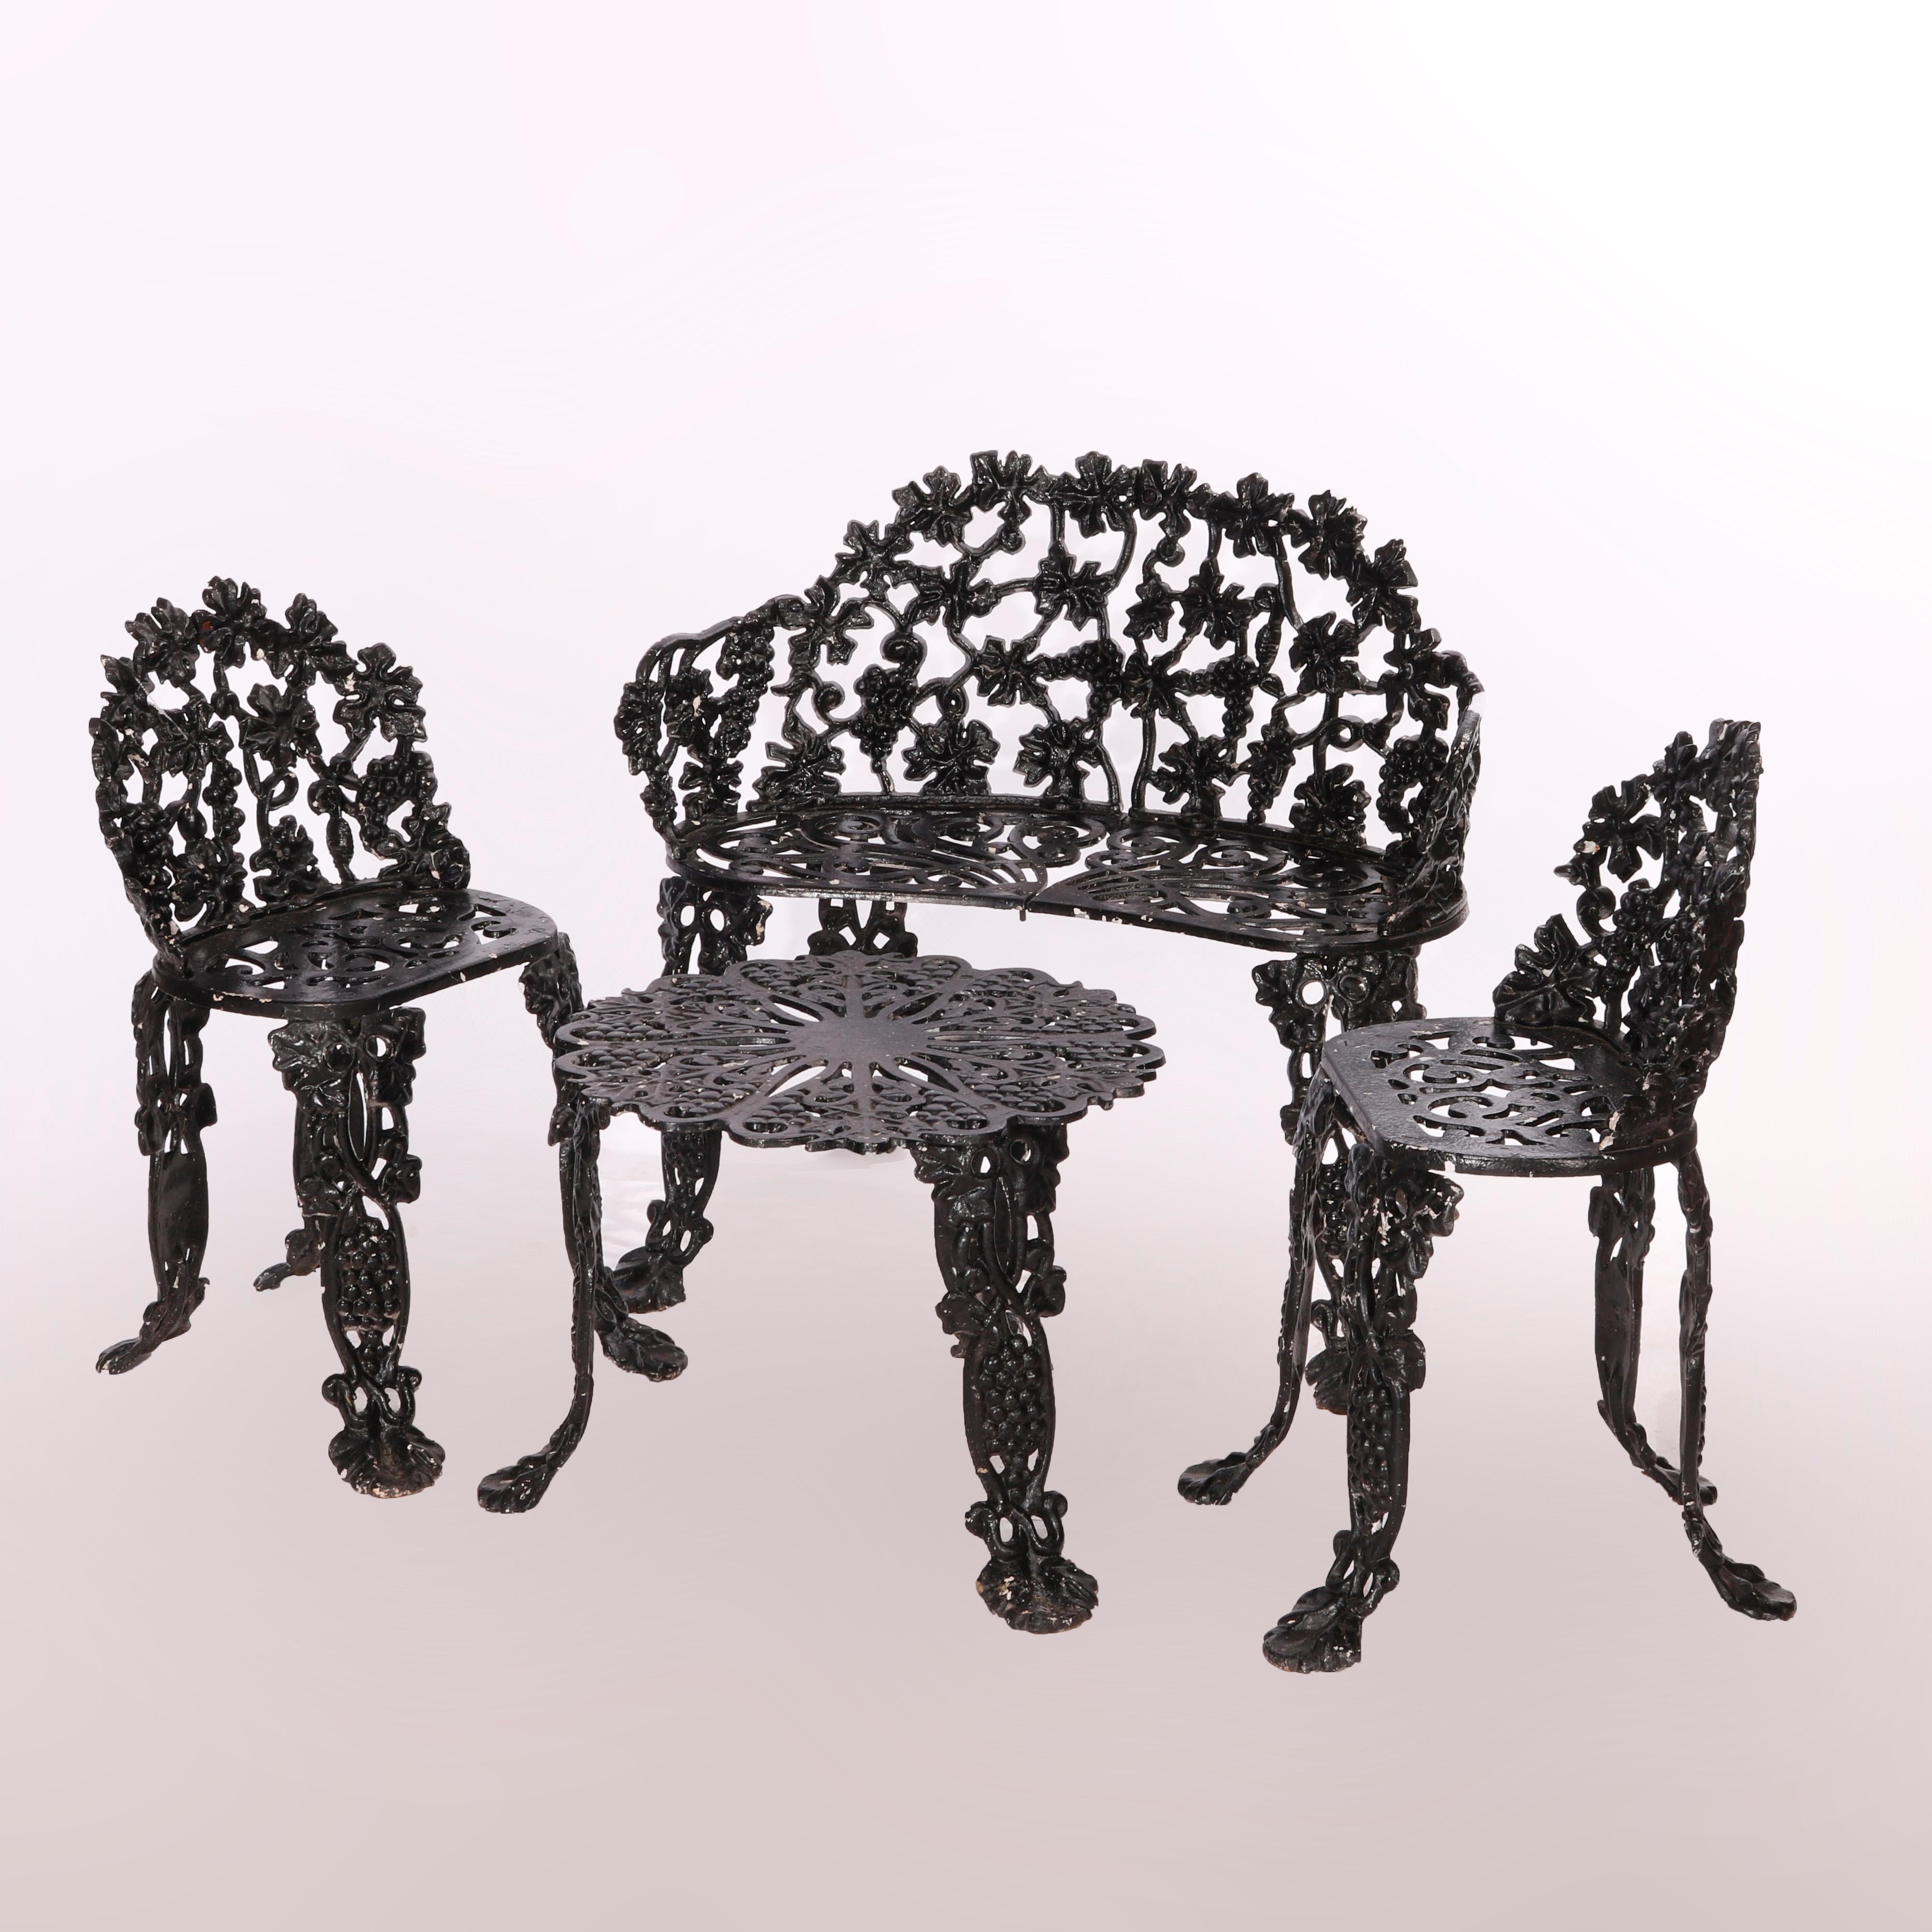 An antique garden or patio set offers pierced cast iron construction in grape and leaf pattern and includes a bench settee, two chairs and side table, c1930

Measures: Table 15.75''H x 22.25''W x 22.25''D; Chairs 27.75''H x 17.5''W x 17.5''D, seat